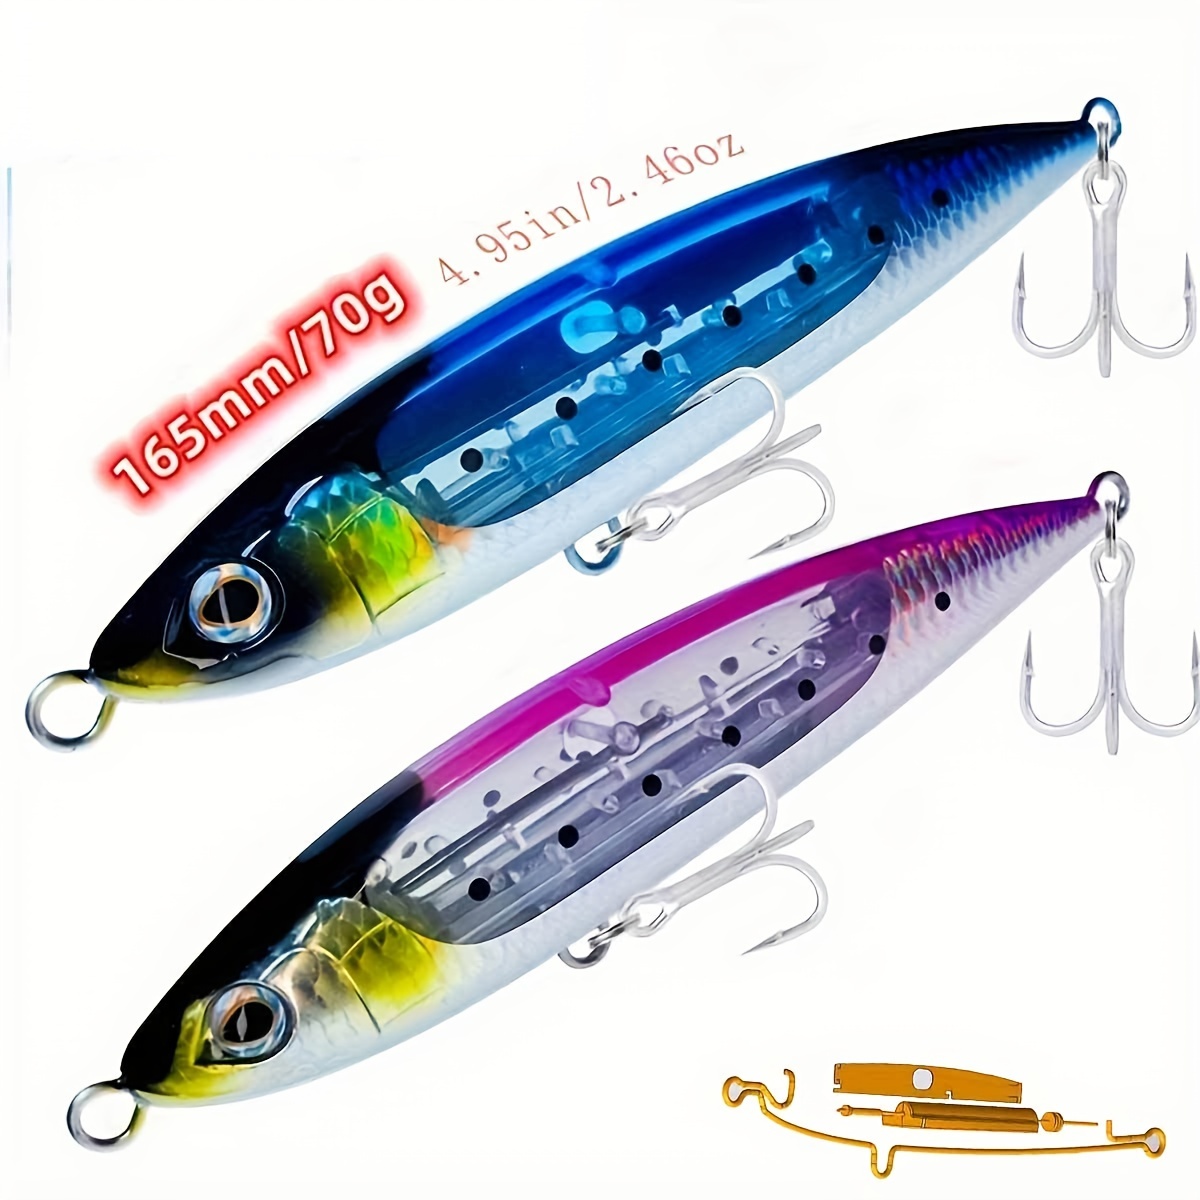 

150mm Floating Lure - Catch Bigger Fish With Japan Ocea Pencil Hard Fishing Bait!